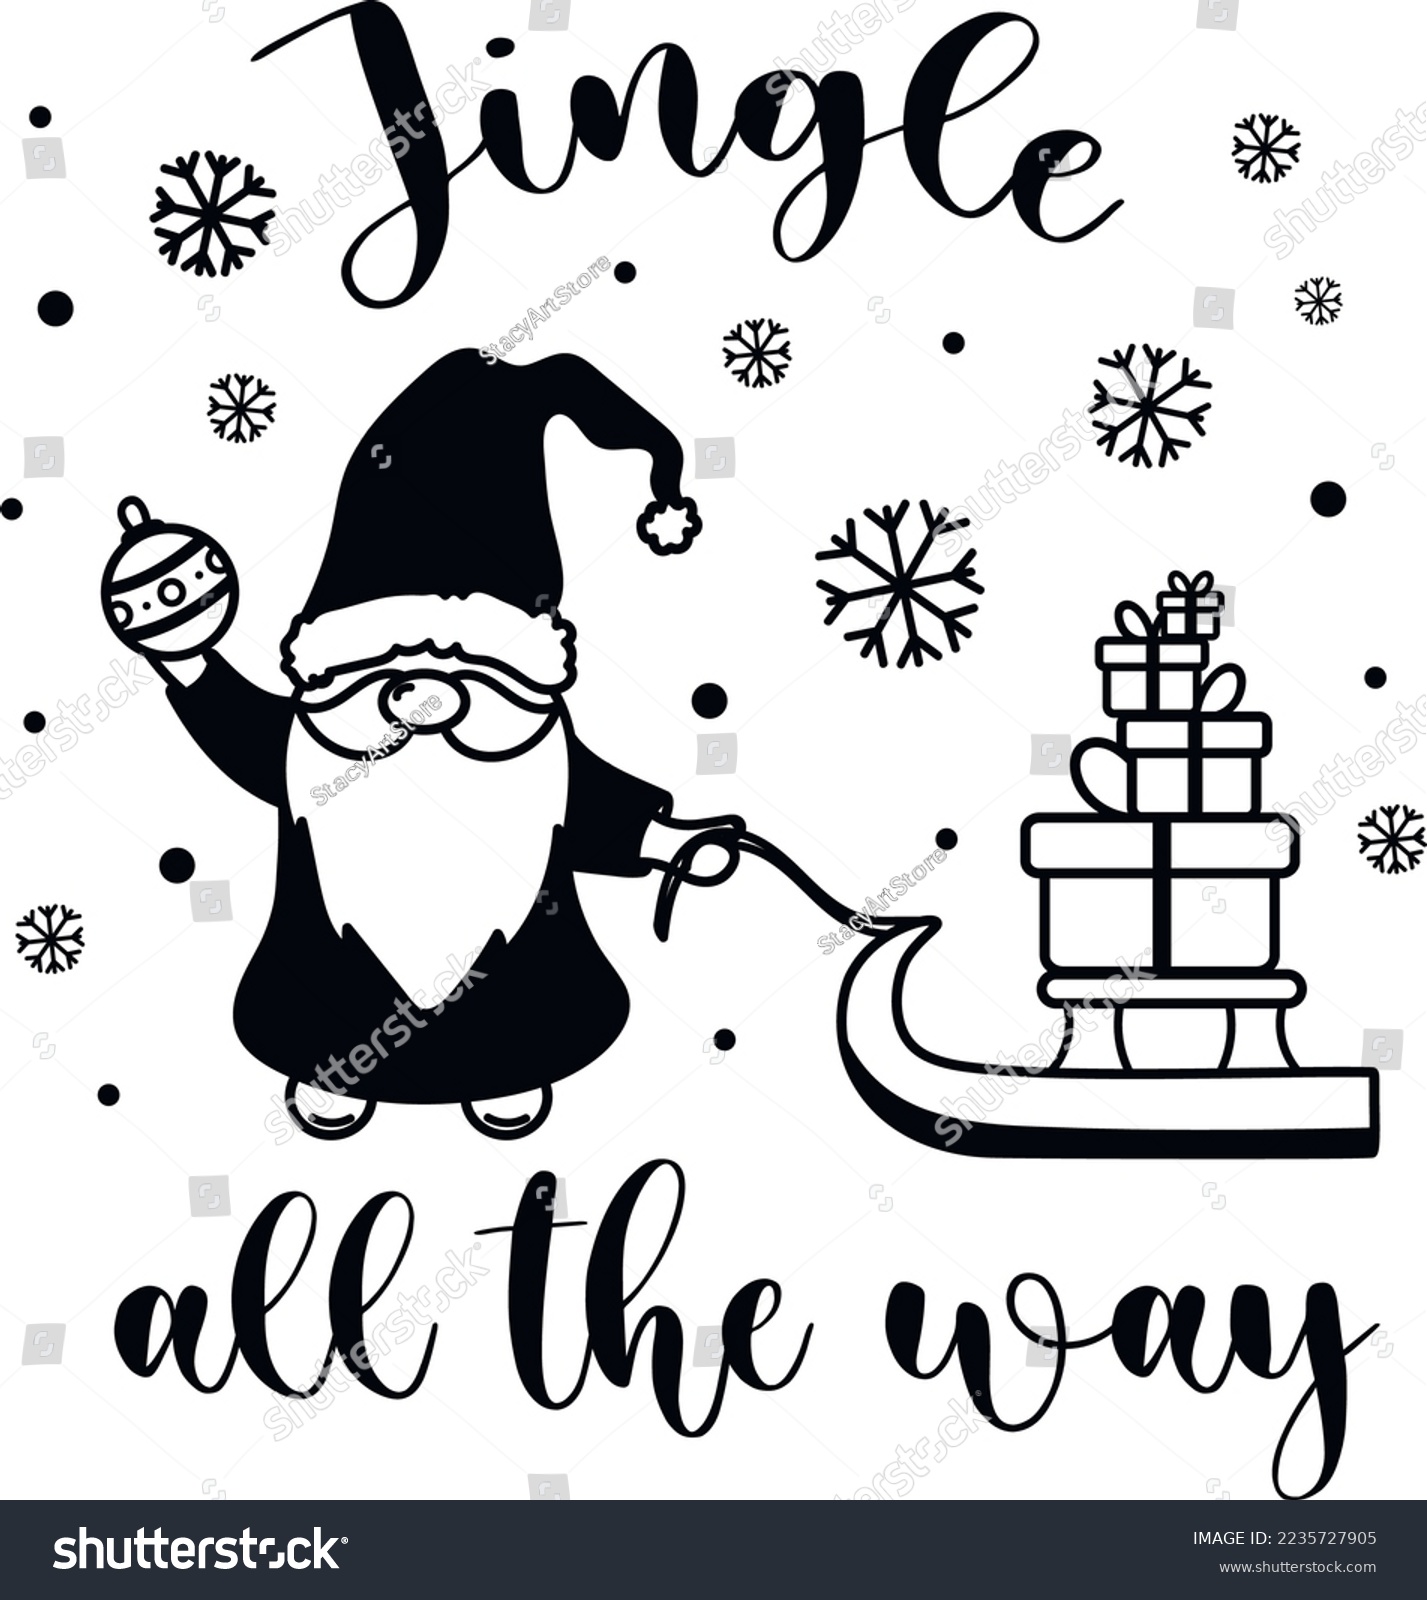 SVG of Hand Drawn Vector Christmas Gnome SVG Illustration Set Isolated on White. Jingle All The Way Quote Composition Perfect for Cut Designs, Cutting Boards, T-shirt, Printing, Greetings and Craft Designs svg